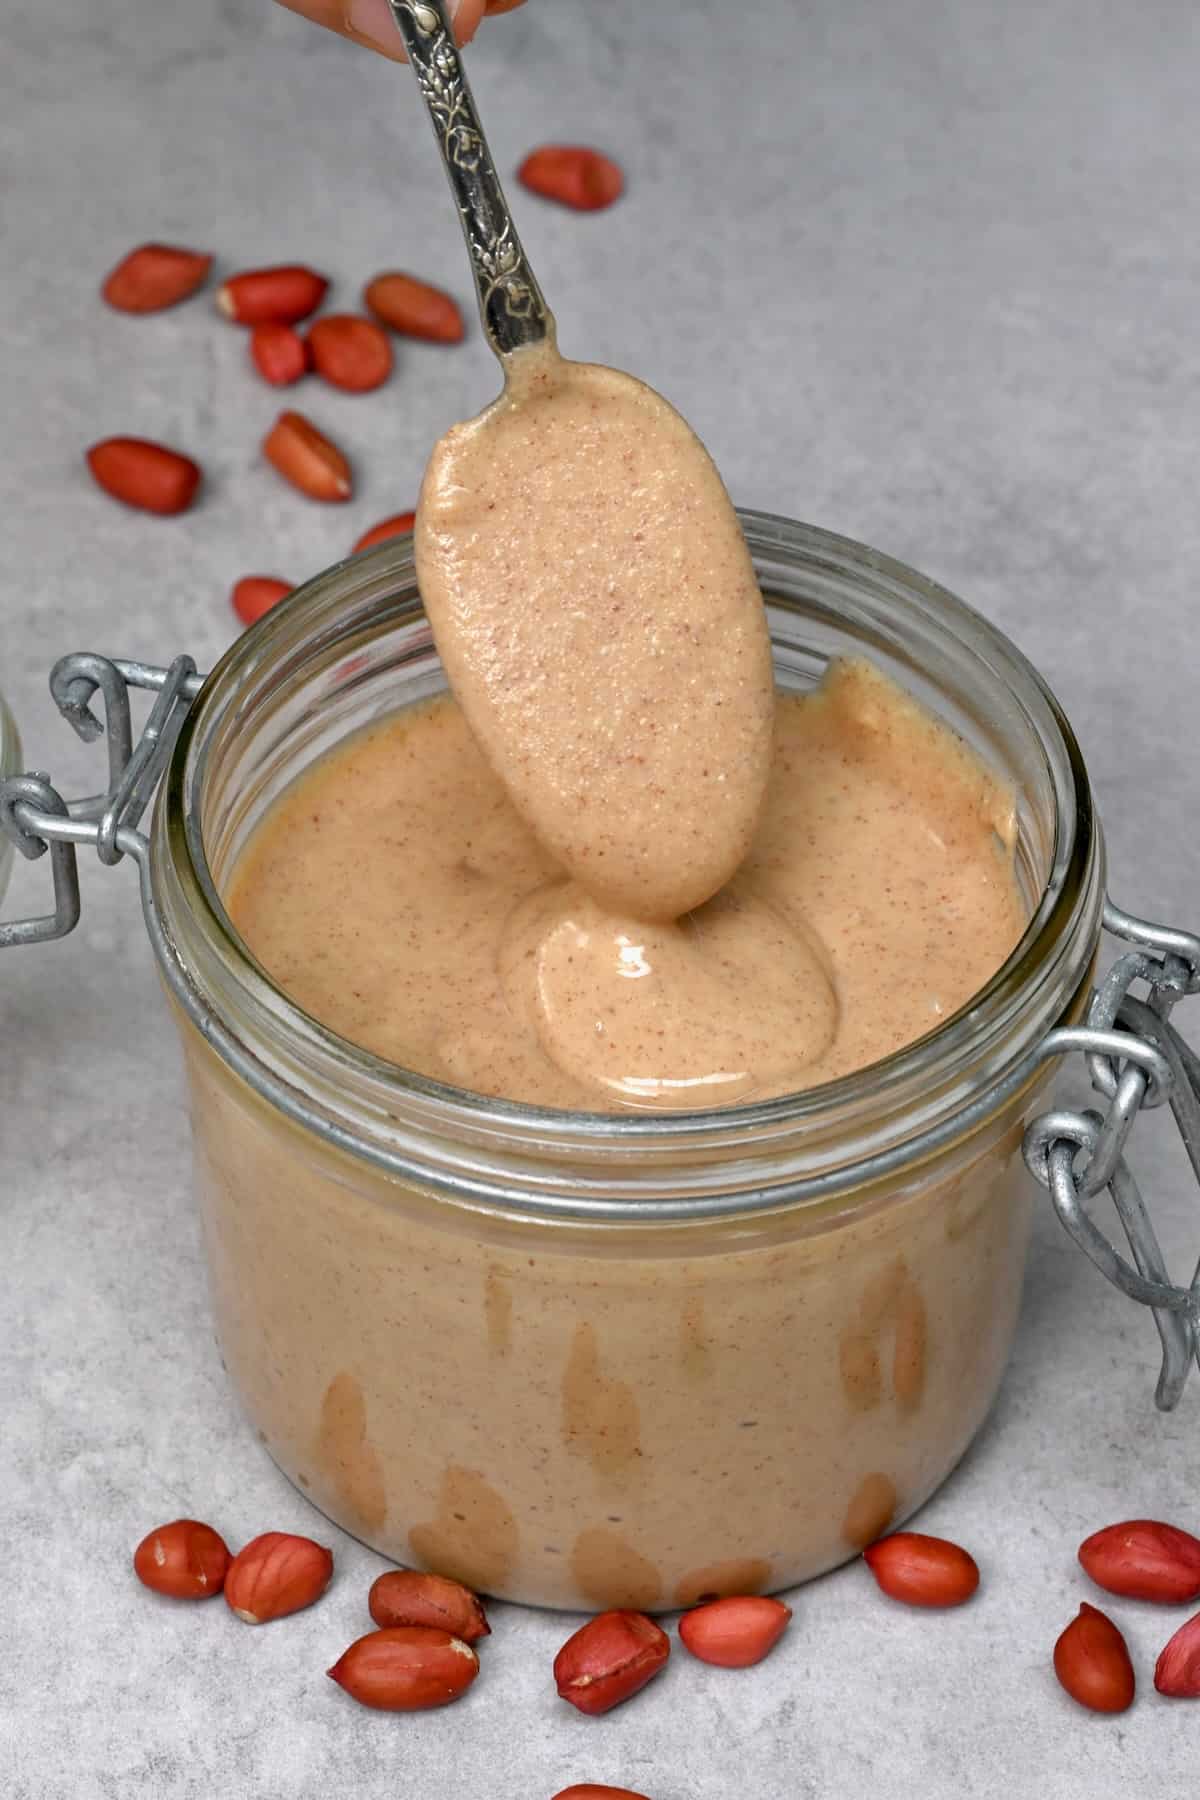 Drizzling peanut butter from a spoon to a jar